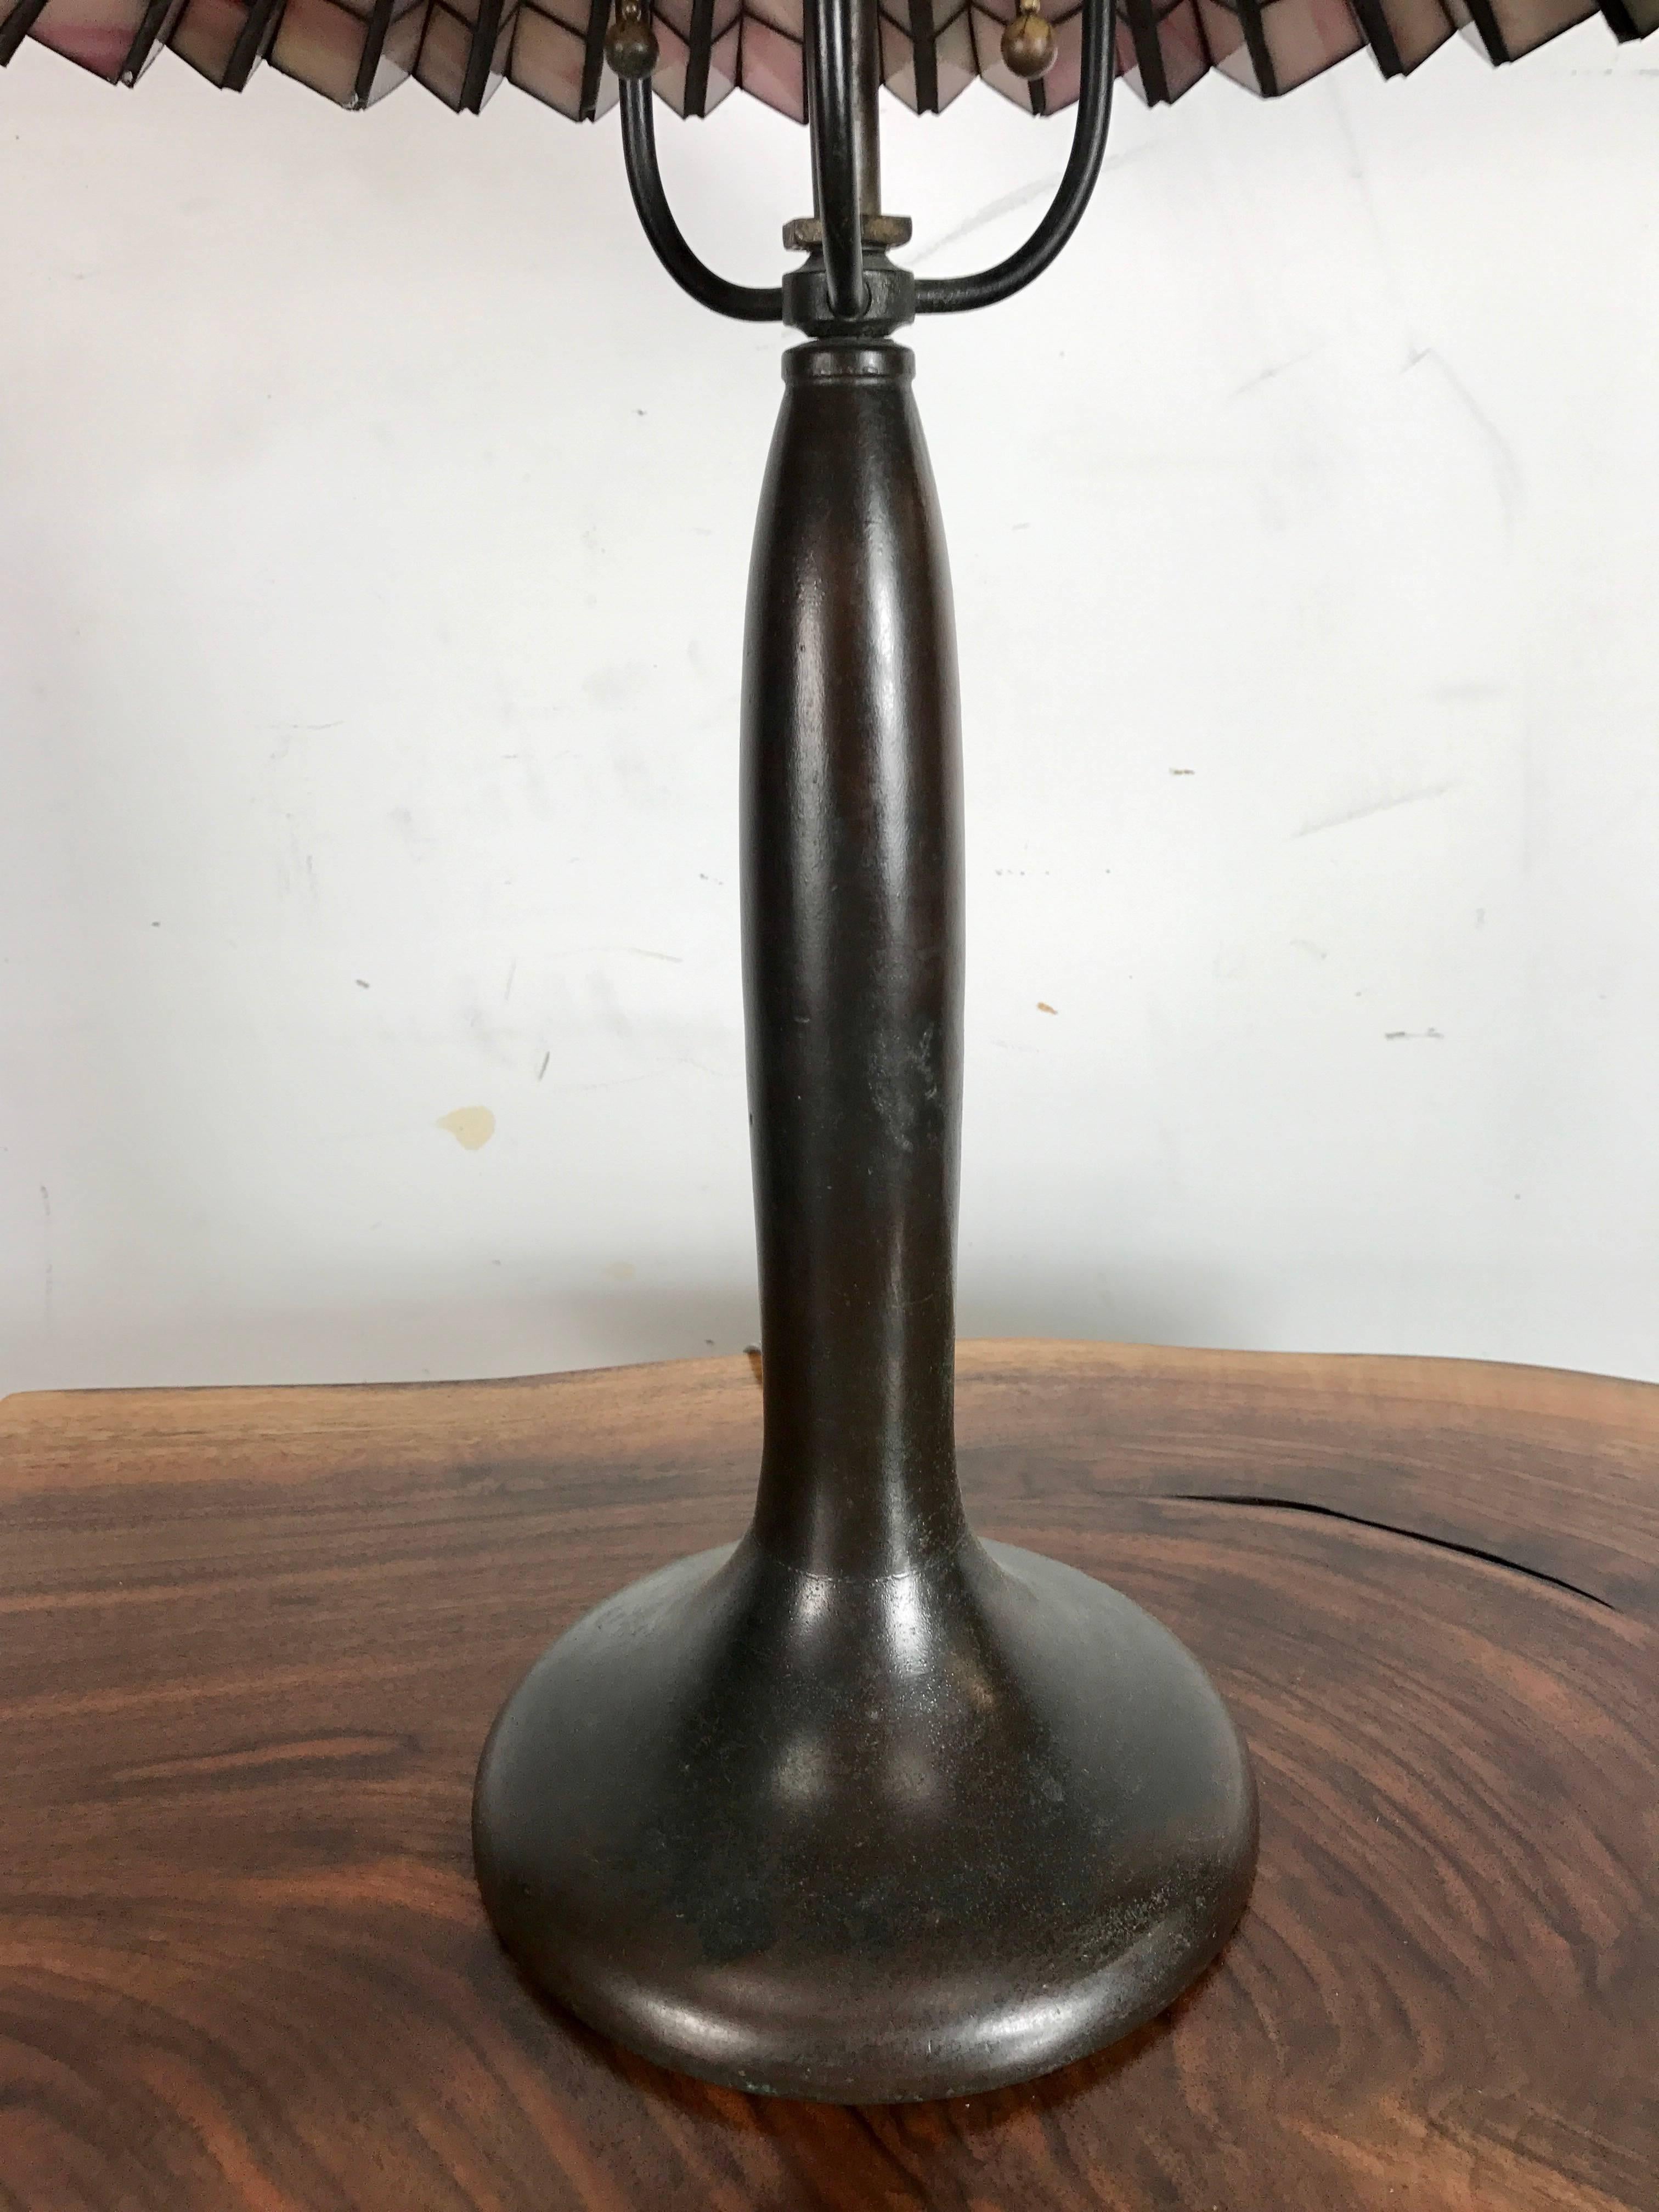 Early Arts and Crafts bronze lamp base by Handel, wonderful verde patina, Classic form. Retains raised Handel mark.